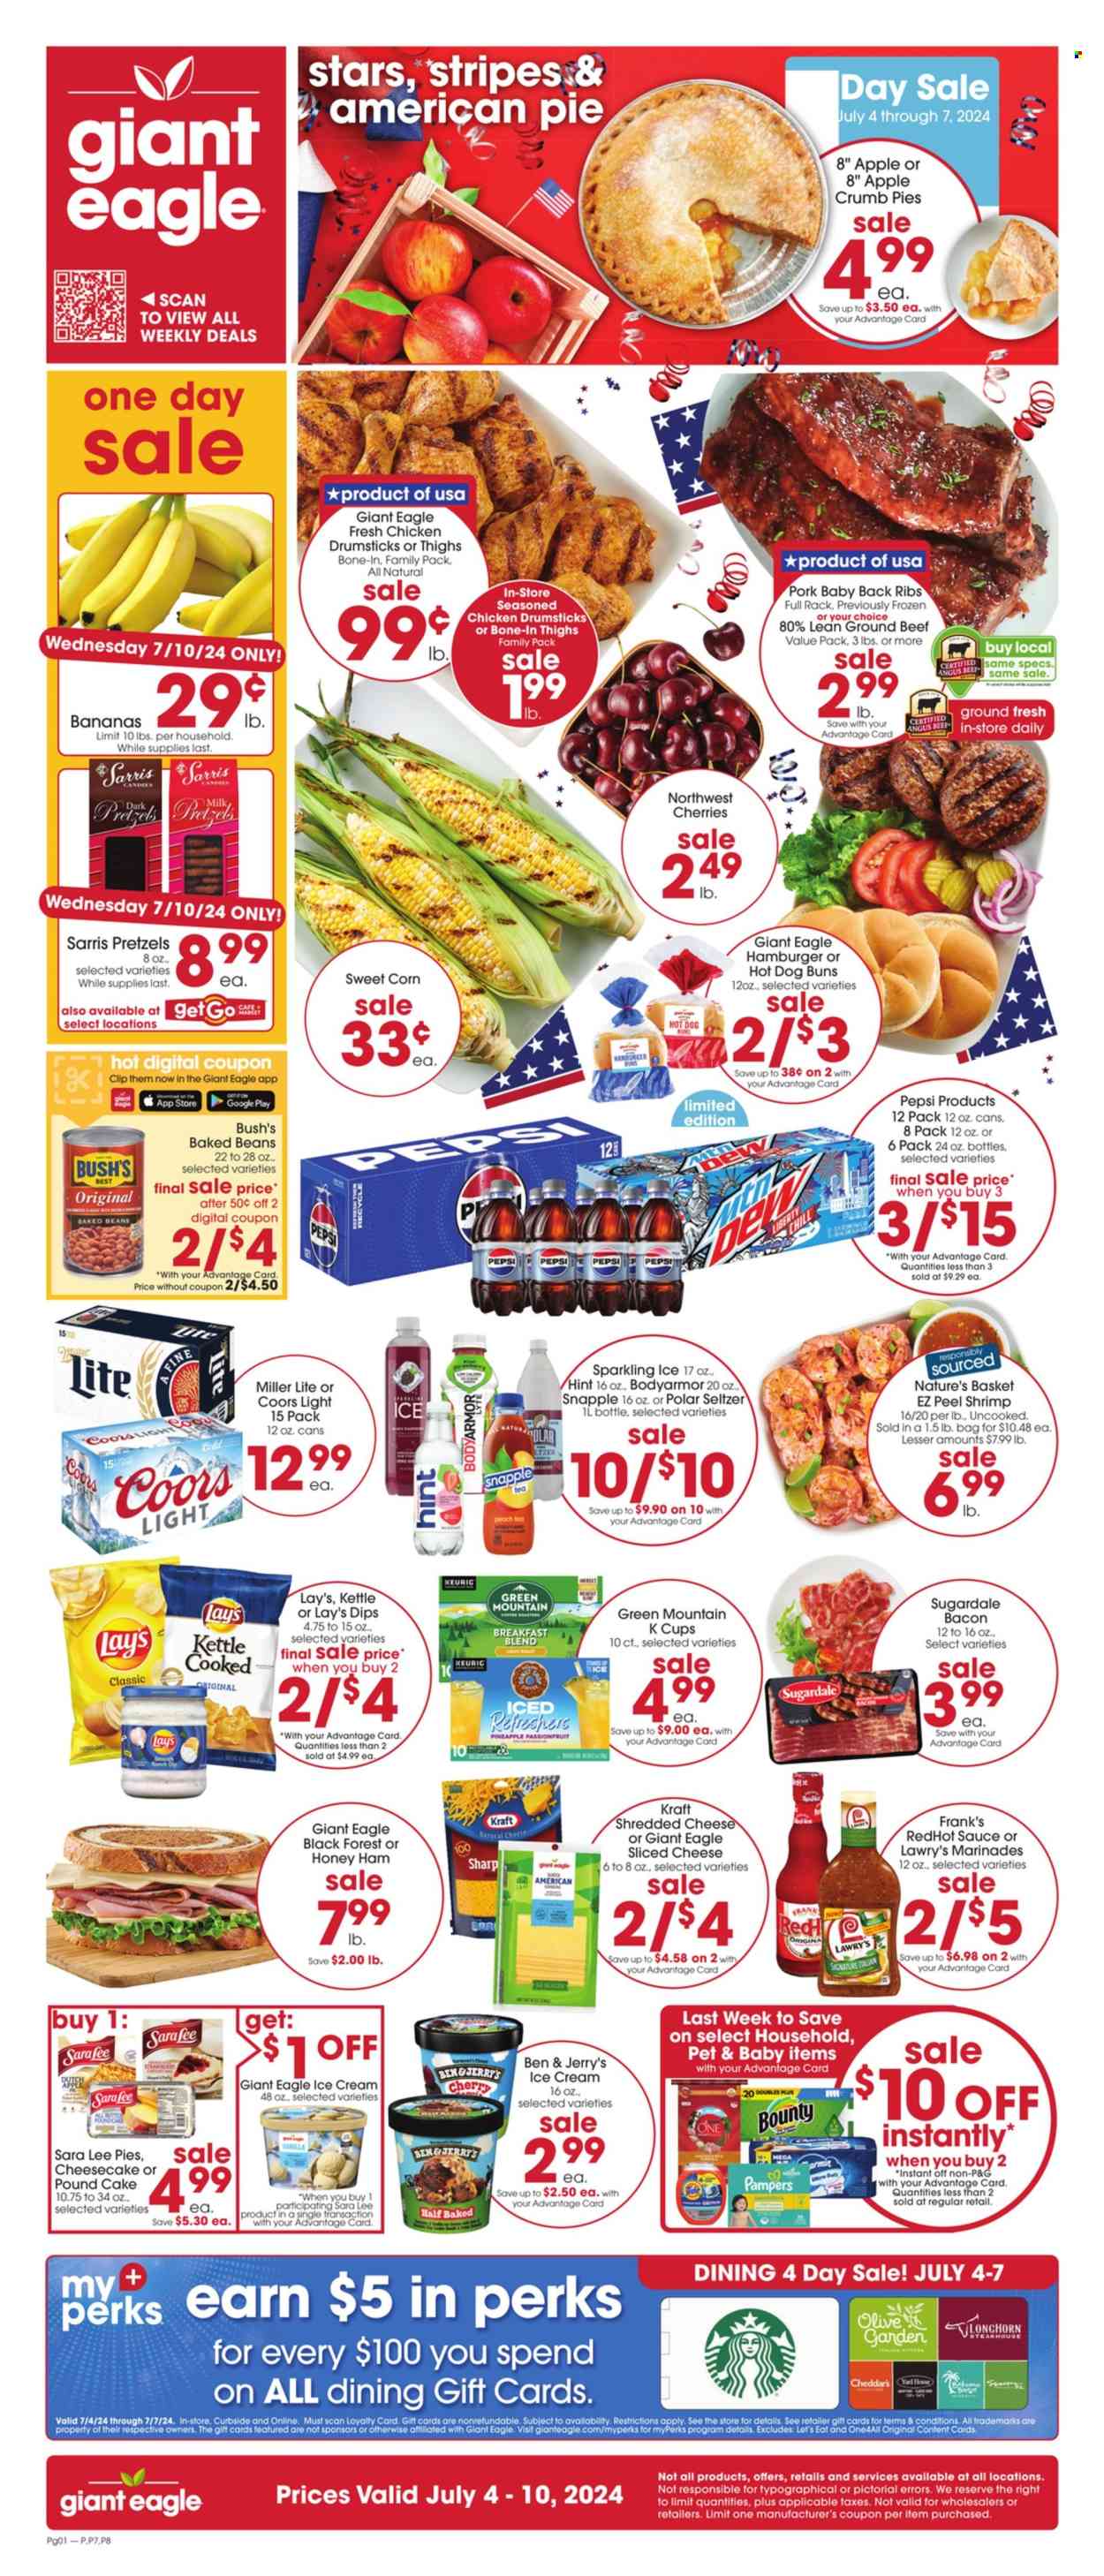 thumbnail - Giant Eagle Flyer - 07/04/2024 - 07/10/2024 - Sales products - hot dog rolls, pretzels, cake, pie, buns, burger buns, Sara Lee, pound cake, sweet corn, pineapple, seafood, shrimps, Kraft®, Sugardale, ready meal, bacon, ham, shredded cheese, sliced cheese, milk, dip, ice cream, Ben & Jerry's, Bounty, sweets, Lay’s, baked beans, hot sauce, marinade, Pepsi, ice tea, soft drink, Snapple, electrolyte drink, seltzer water, flavored water, sparkling water, carbonated soft drink, coffee capsules, K-Cups, Keurig, breakfast blend, Green Mountain, beer, chicken thighs, chicken drumsticks, beef meat, ground beef, pork meat, pork ribs, pork back ribs, Pampers, Yard, Sharp, Miller Lite, Coors. Page 1.